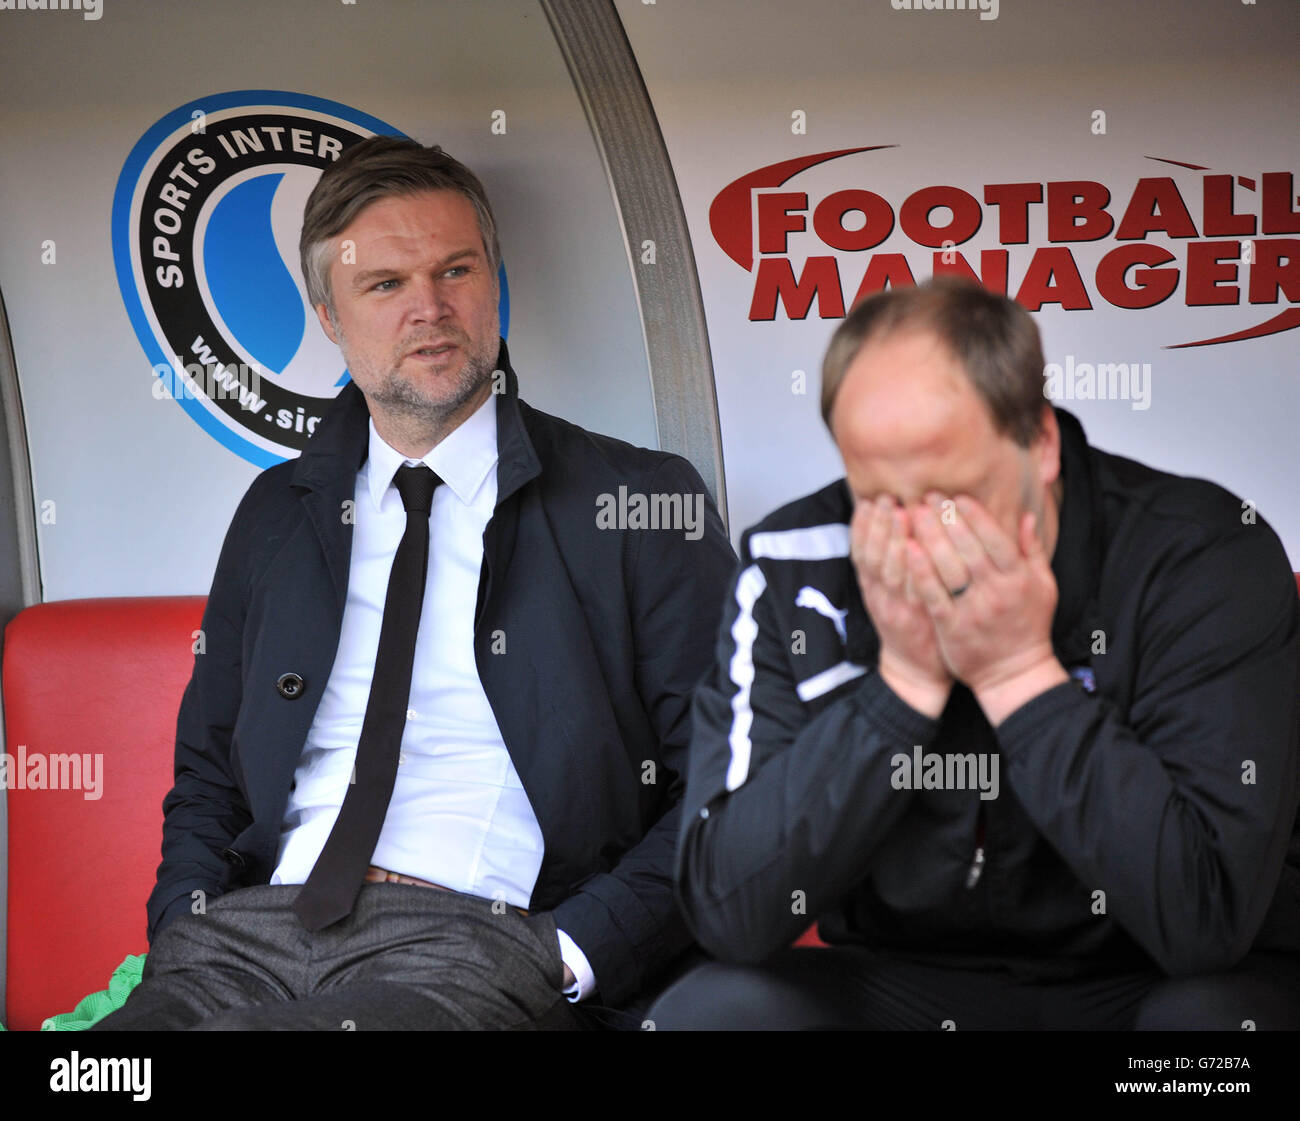 Soccer - Sky Bet League One - Sheffield United v Coventry City - Bramall Lane. Coventry City's manager Steven Pressley and assistant manager Neil McFarland during the game Stock Photo